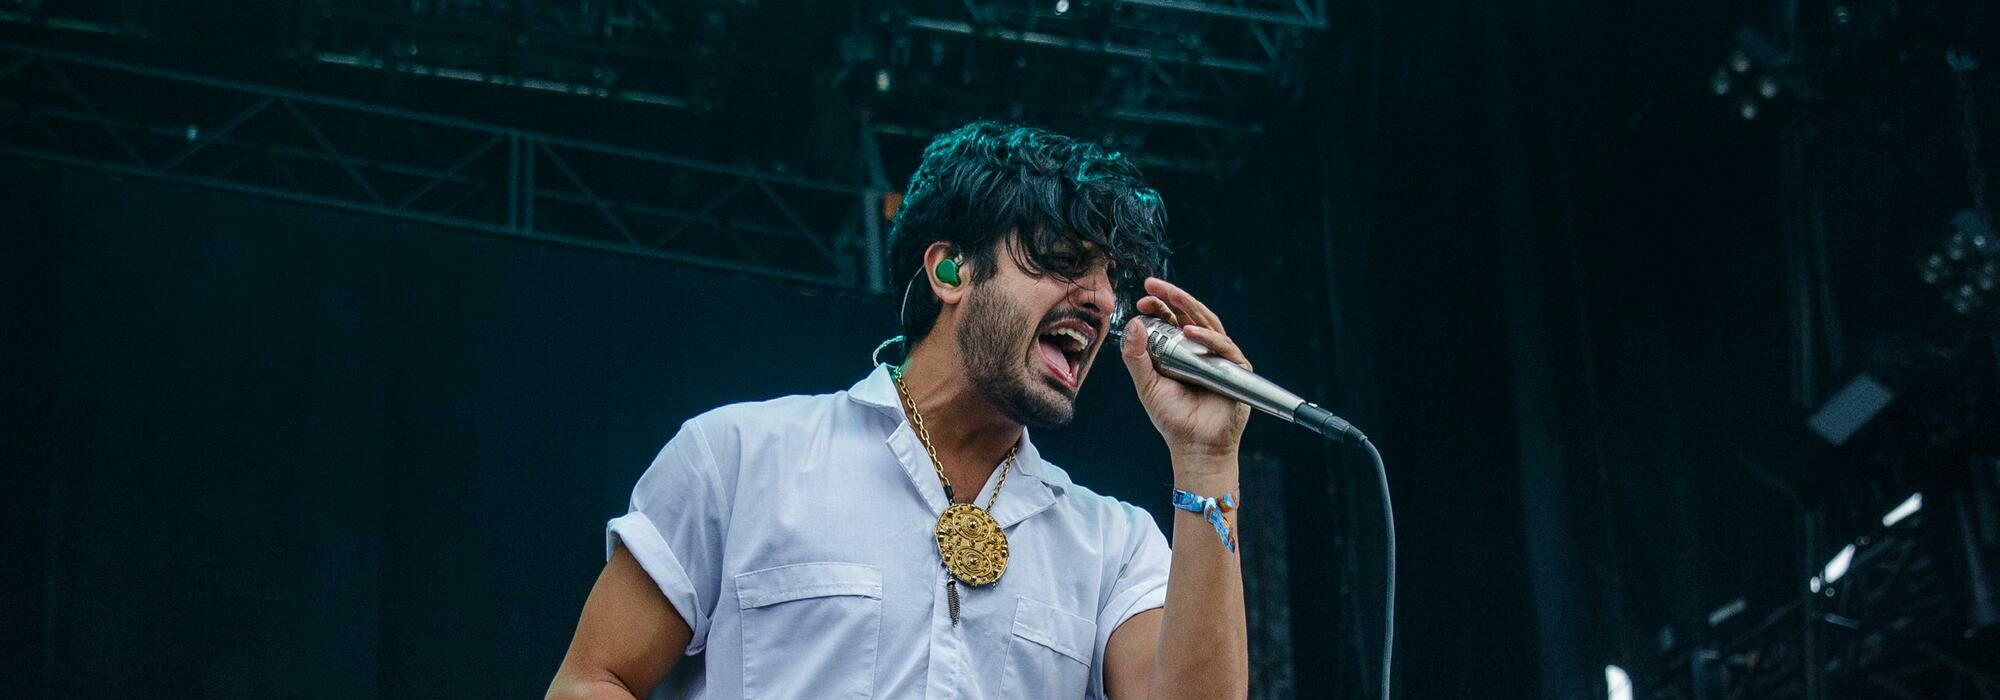 A Young The Giant live event